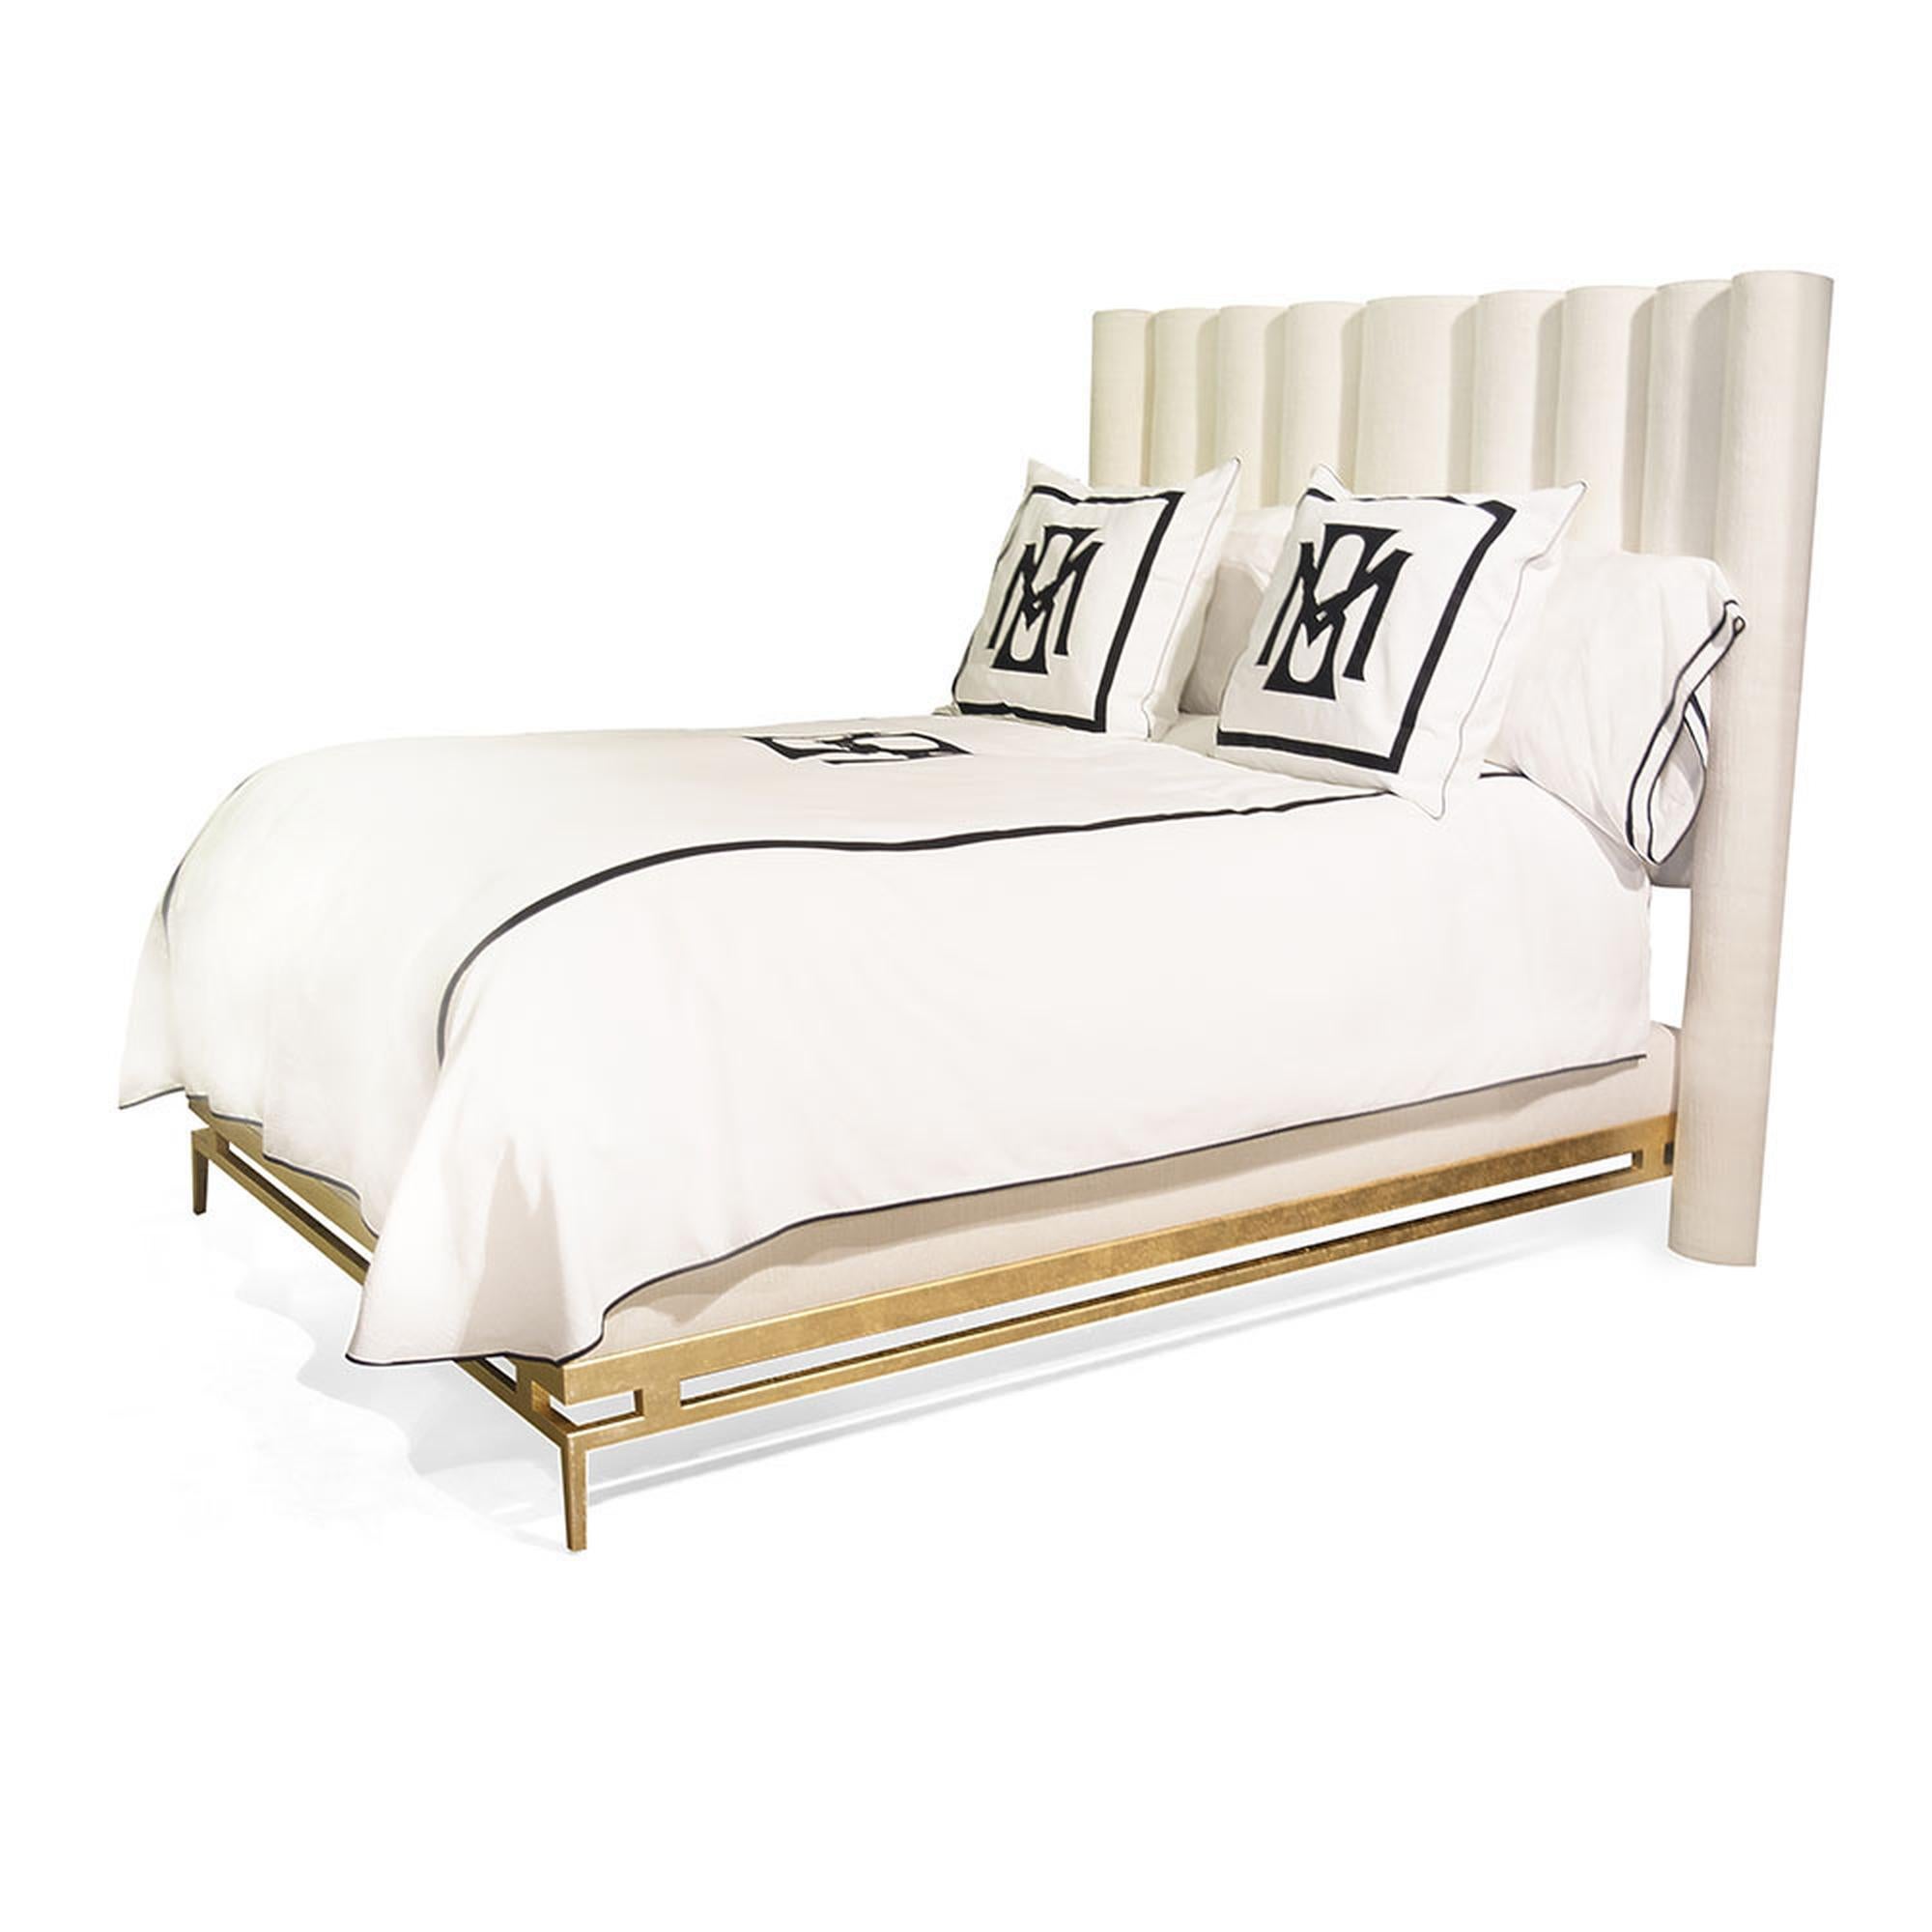 The Catalina bed is nothing short of a dream. With its upholstered platform and vertical channel tufted headboard, the unique design brings a modern yet relaxed elegance to any bedroom. The metal frame and legs support the bed beautifully for a